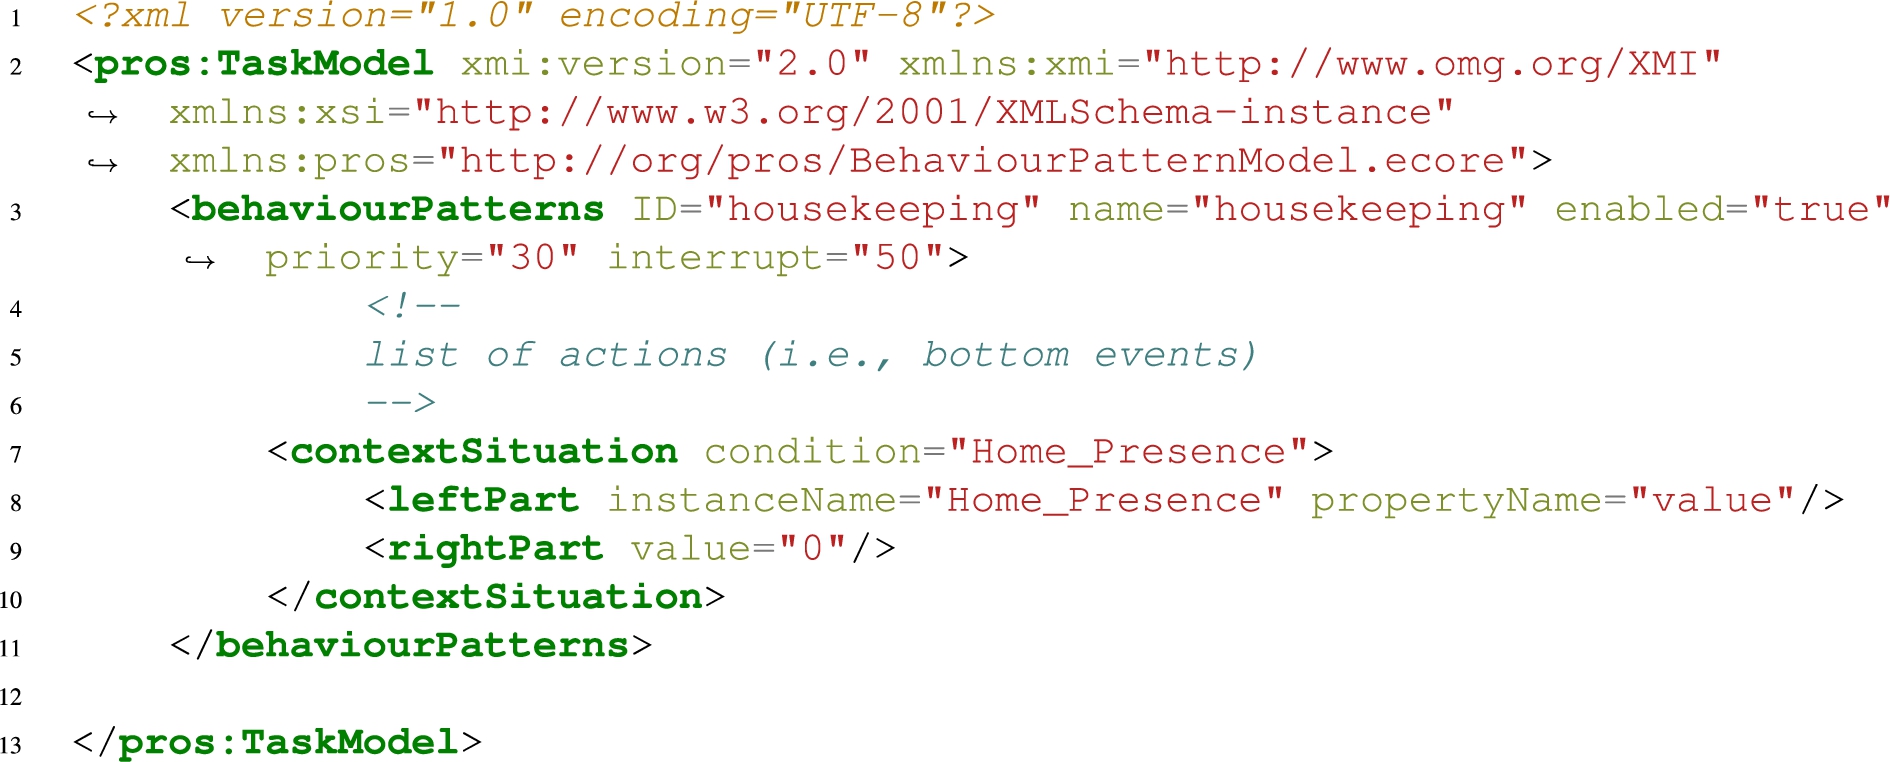 Example of task model translated by using the XML notation. The task model include a behaviourPatterns tag, which describes and models an activity (i.e., a main event), in this case housekeeping. It is composed of a list of actions (i.e., bottom events) defined through the refinements tag (see Fig. 7). In this case, there is also a contextSituation tag: the entire activity can start only if the inhabitant is at home (i.e., the Home_Presence parameter is set to 0).